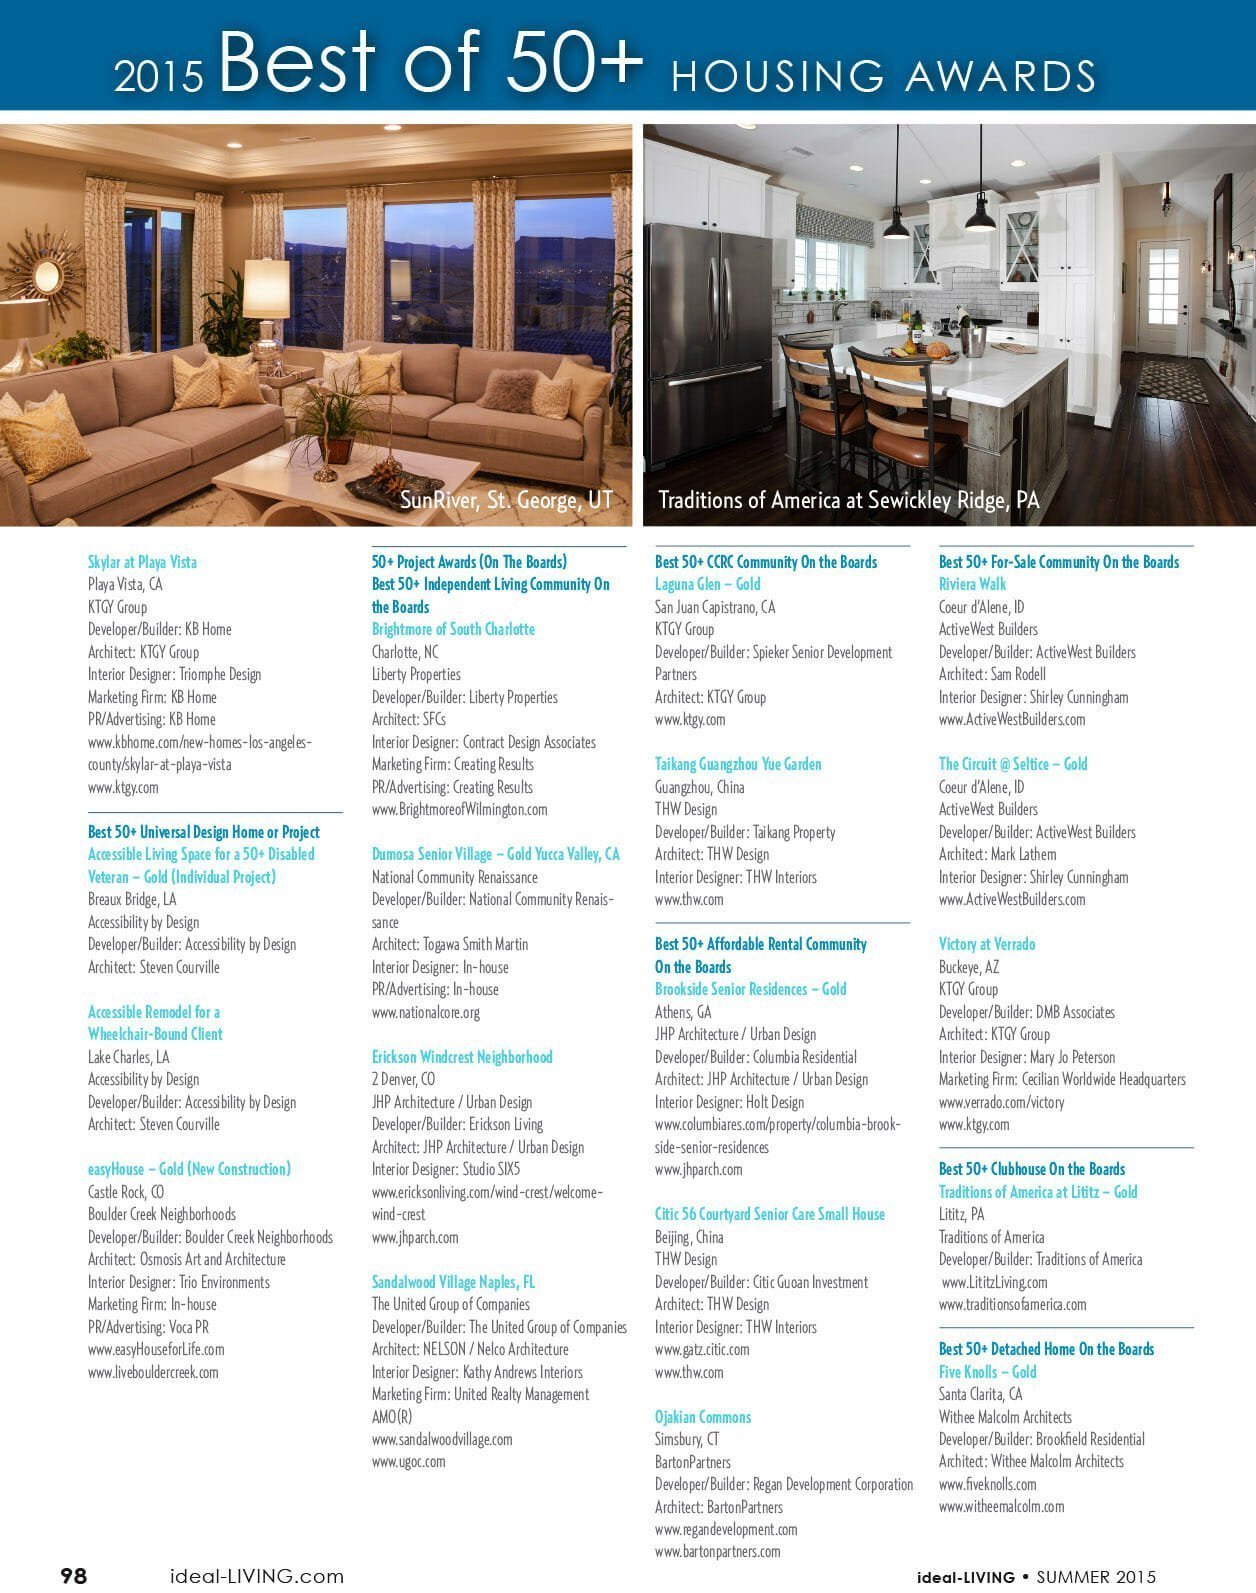 2015 Best of 50+ housing awards page 5